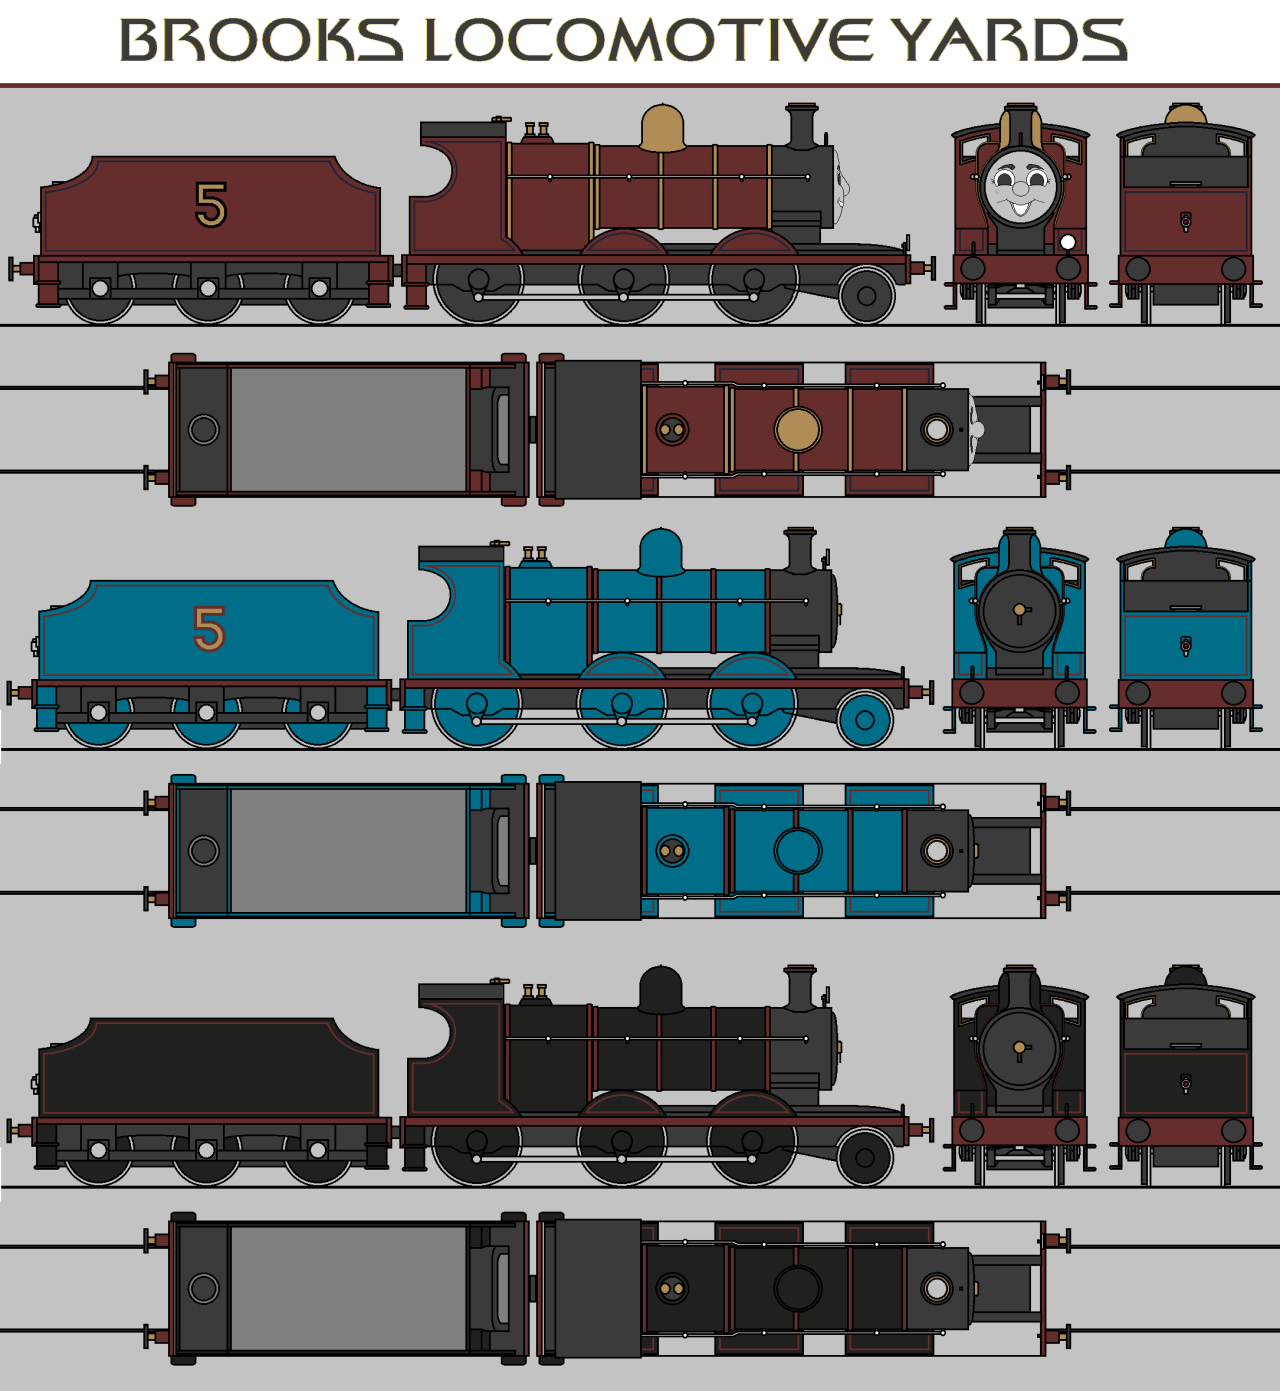 James the Splendid Red Engine! Here he is in NWR Mixed Red, NWR Express Passenger Blue, and L&Y goods black. Tell me if there are any other colors you want to see him in! #ttte#ttte fanart#ttte james#rws#rws sodor #island of sodor  #the railway series  #james the red engine #nwr #north western railway